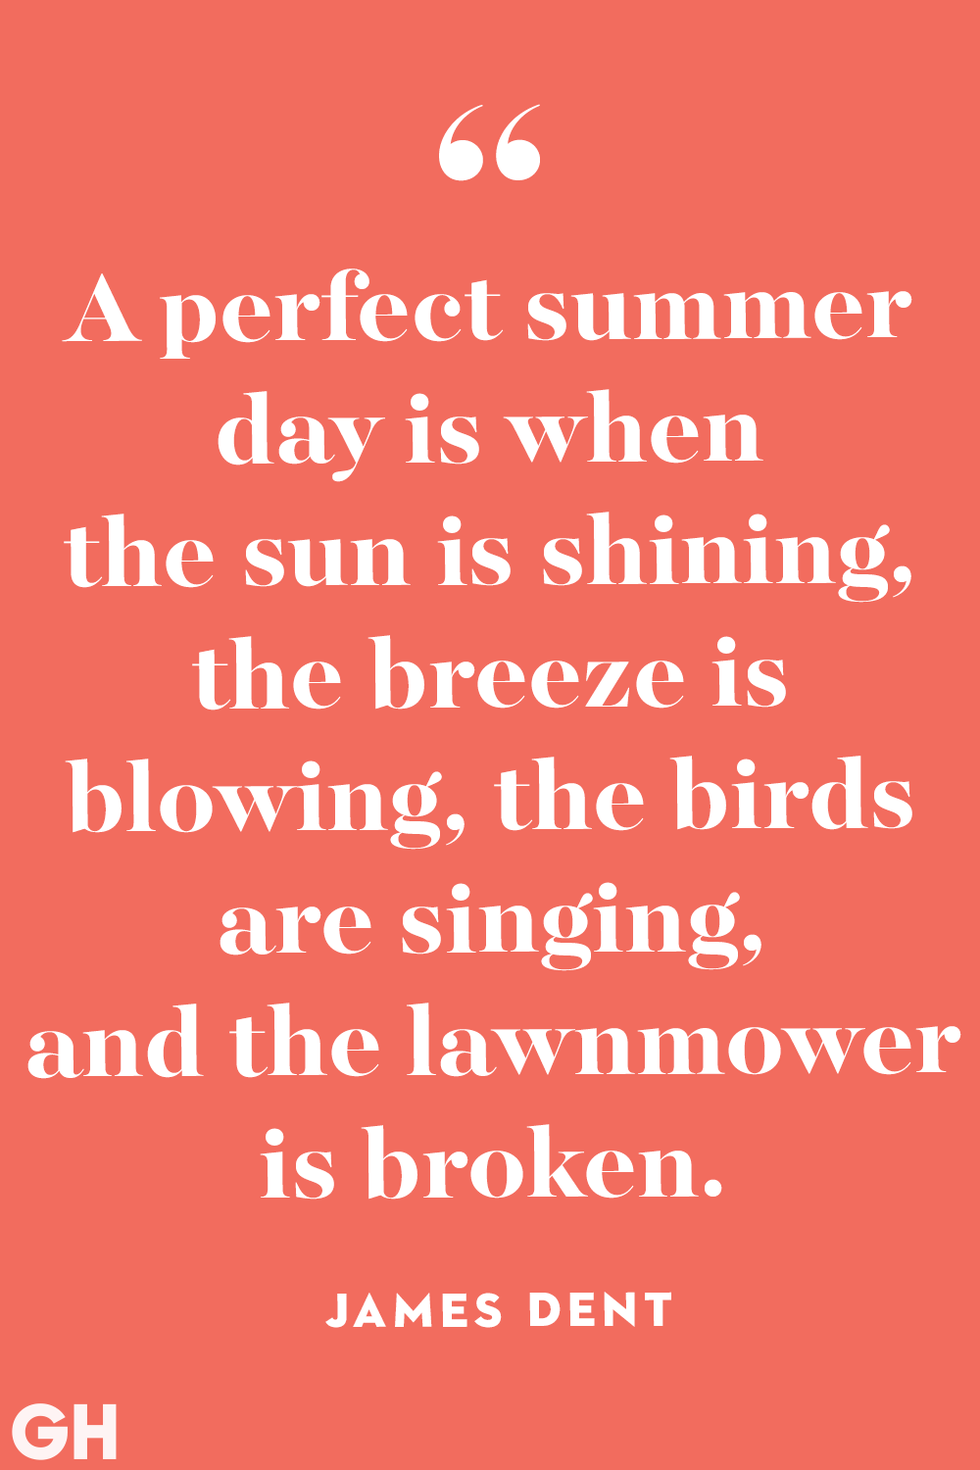 summer quote by james dent